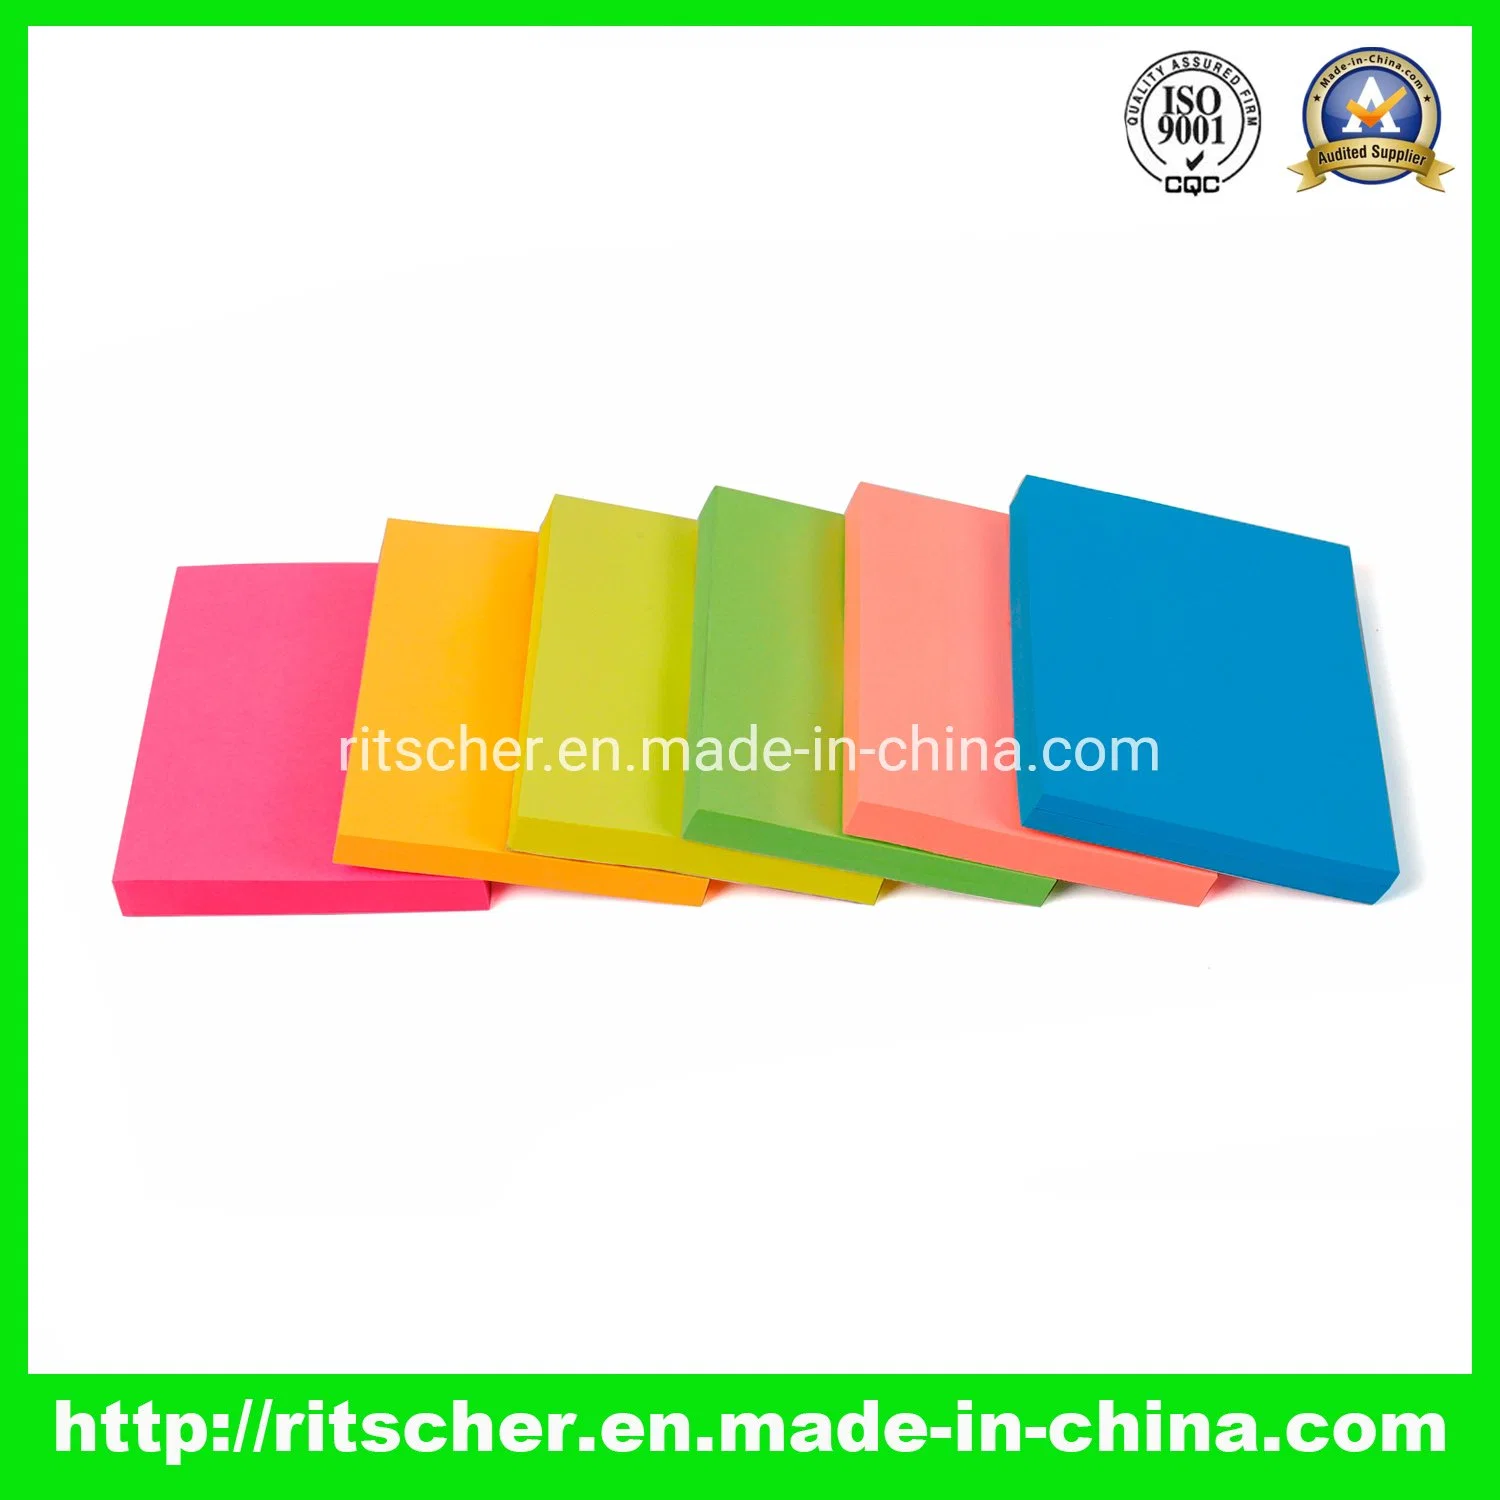 High quality/High cost performance  Acrylic Color of Drawing Pads & Drawing Books